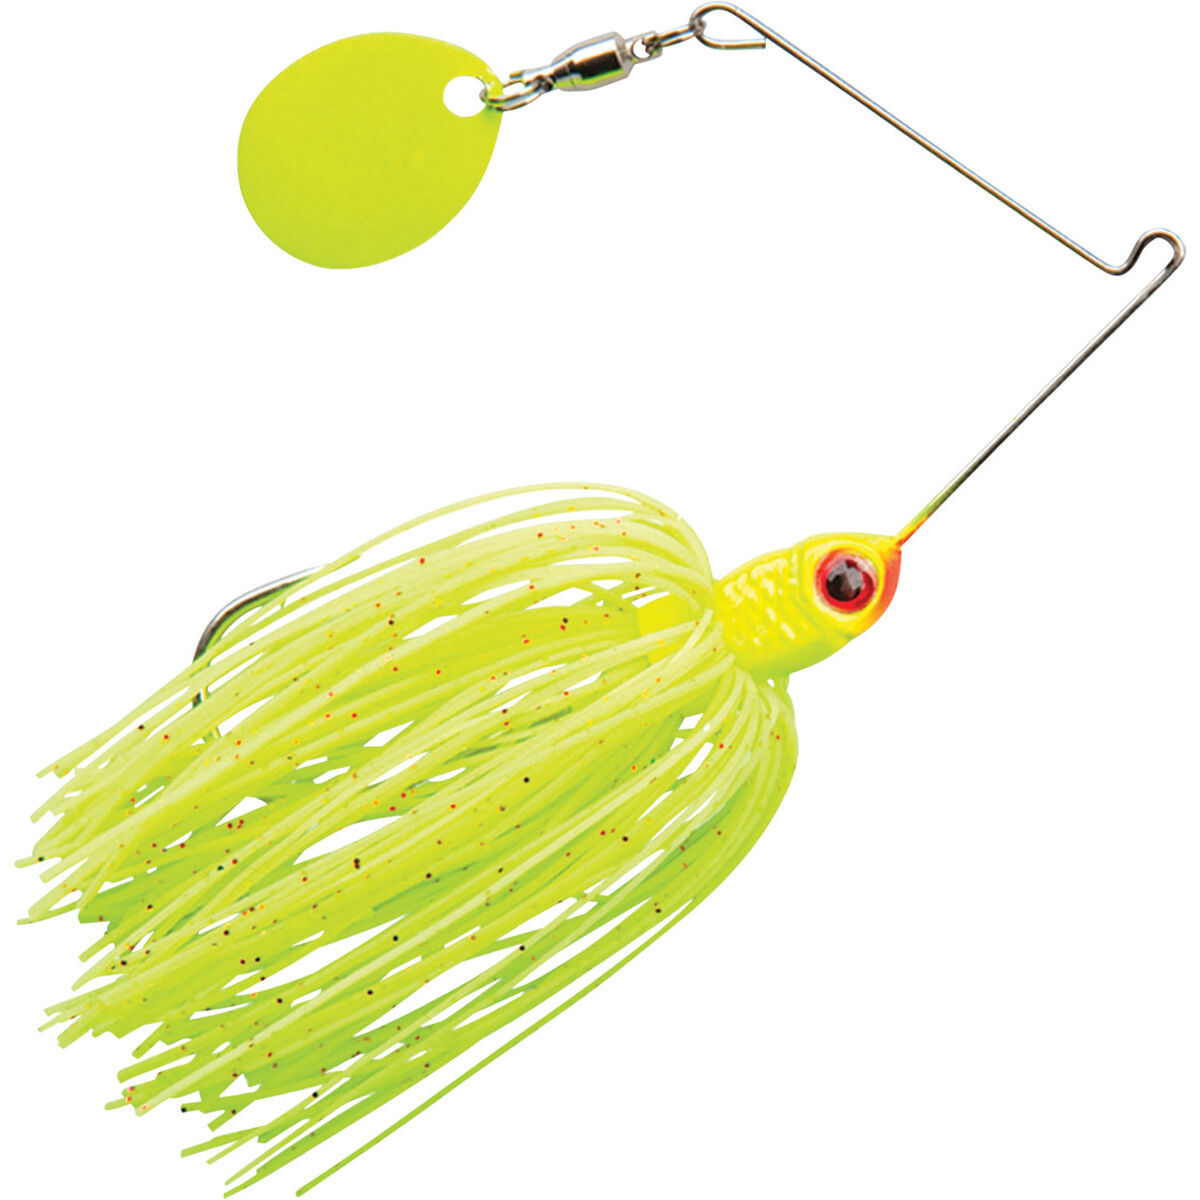 Spinnerbait lure Booyah Vibra-Flx 10 g - Nootica - Water addicts